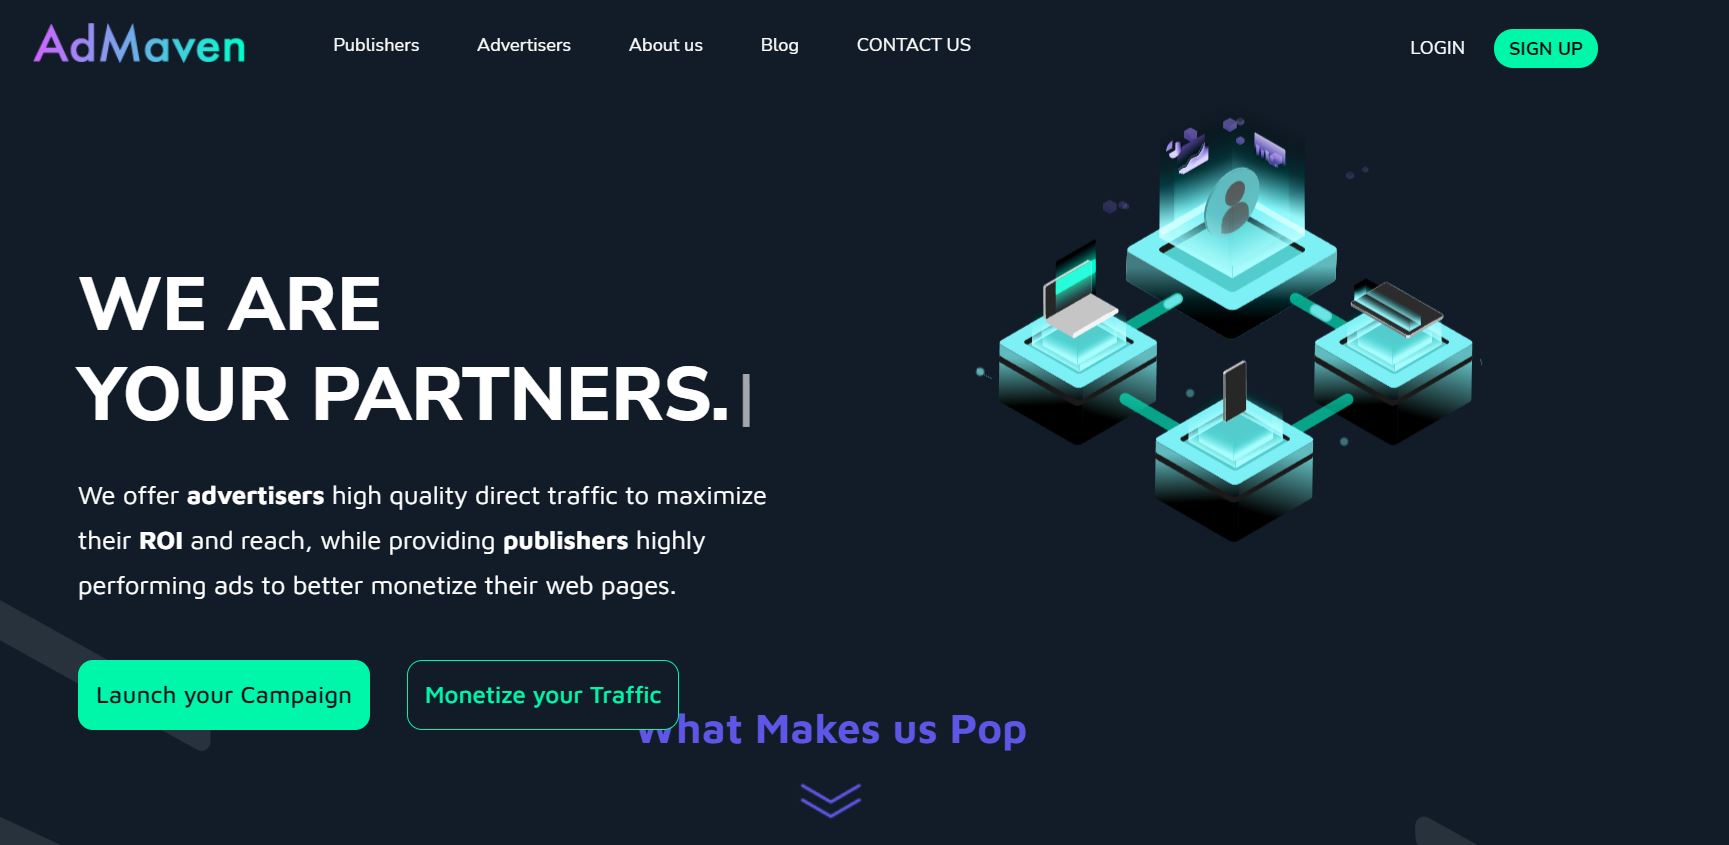 AdMaven Review 2022- Best Ad Network For Advertisers & Publishers?